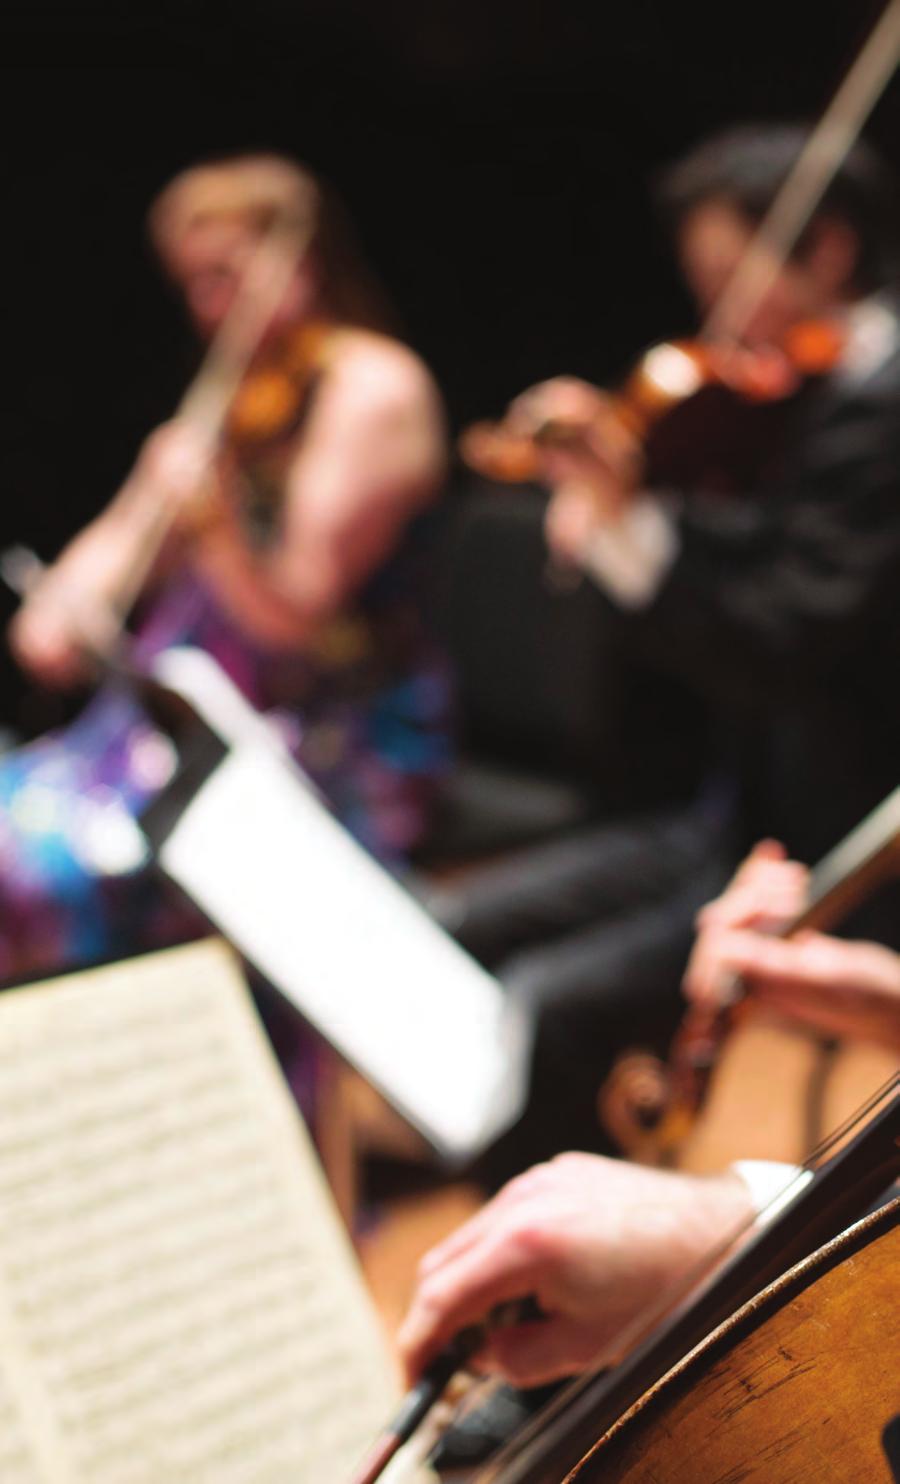 MAINSTAGE CONCERTS 2018 19 ALICE TULLY HALL FROM MENDELSSOHN SUNDAY 4/28 /19 5:00 PM Mendelssohn s combined mastery of melody, form, counterpoint, and the chamber idiom was admired and imitated by